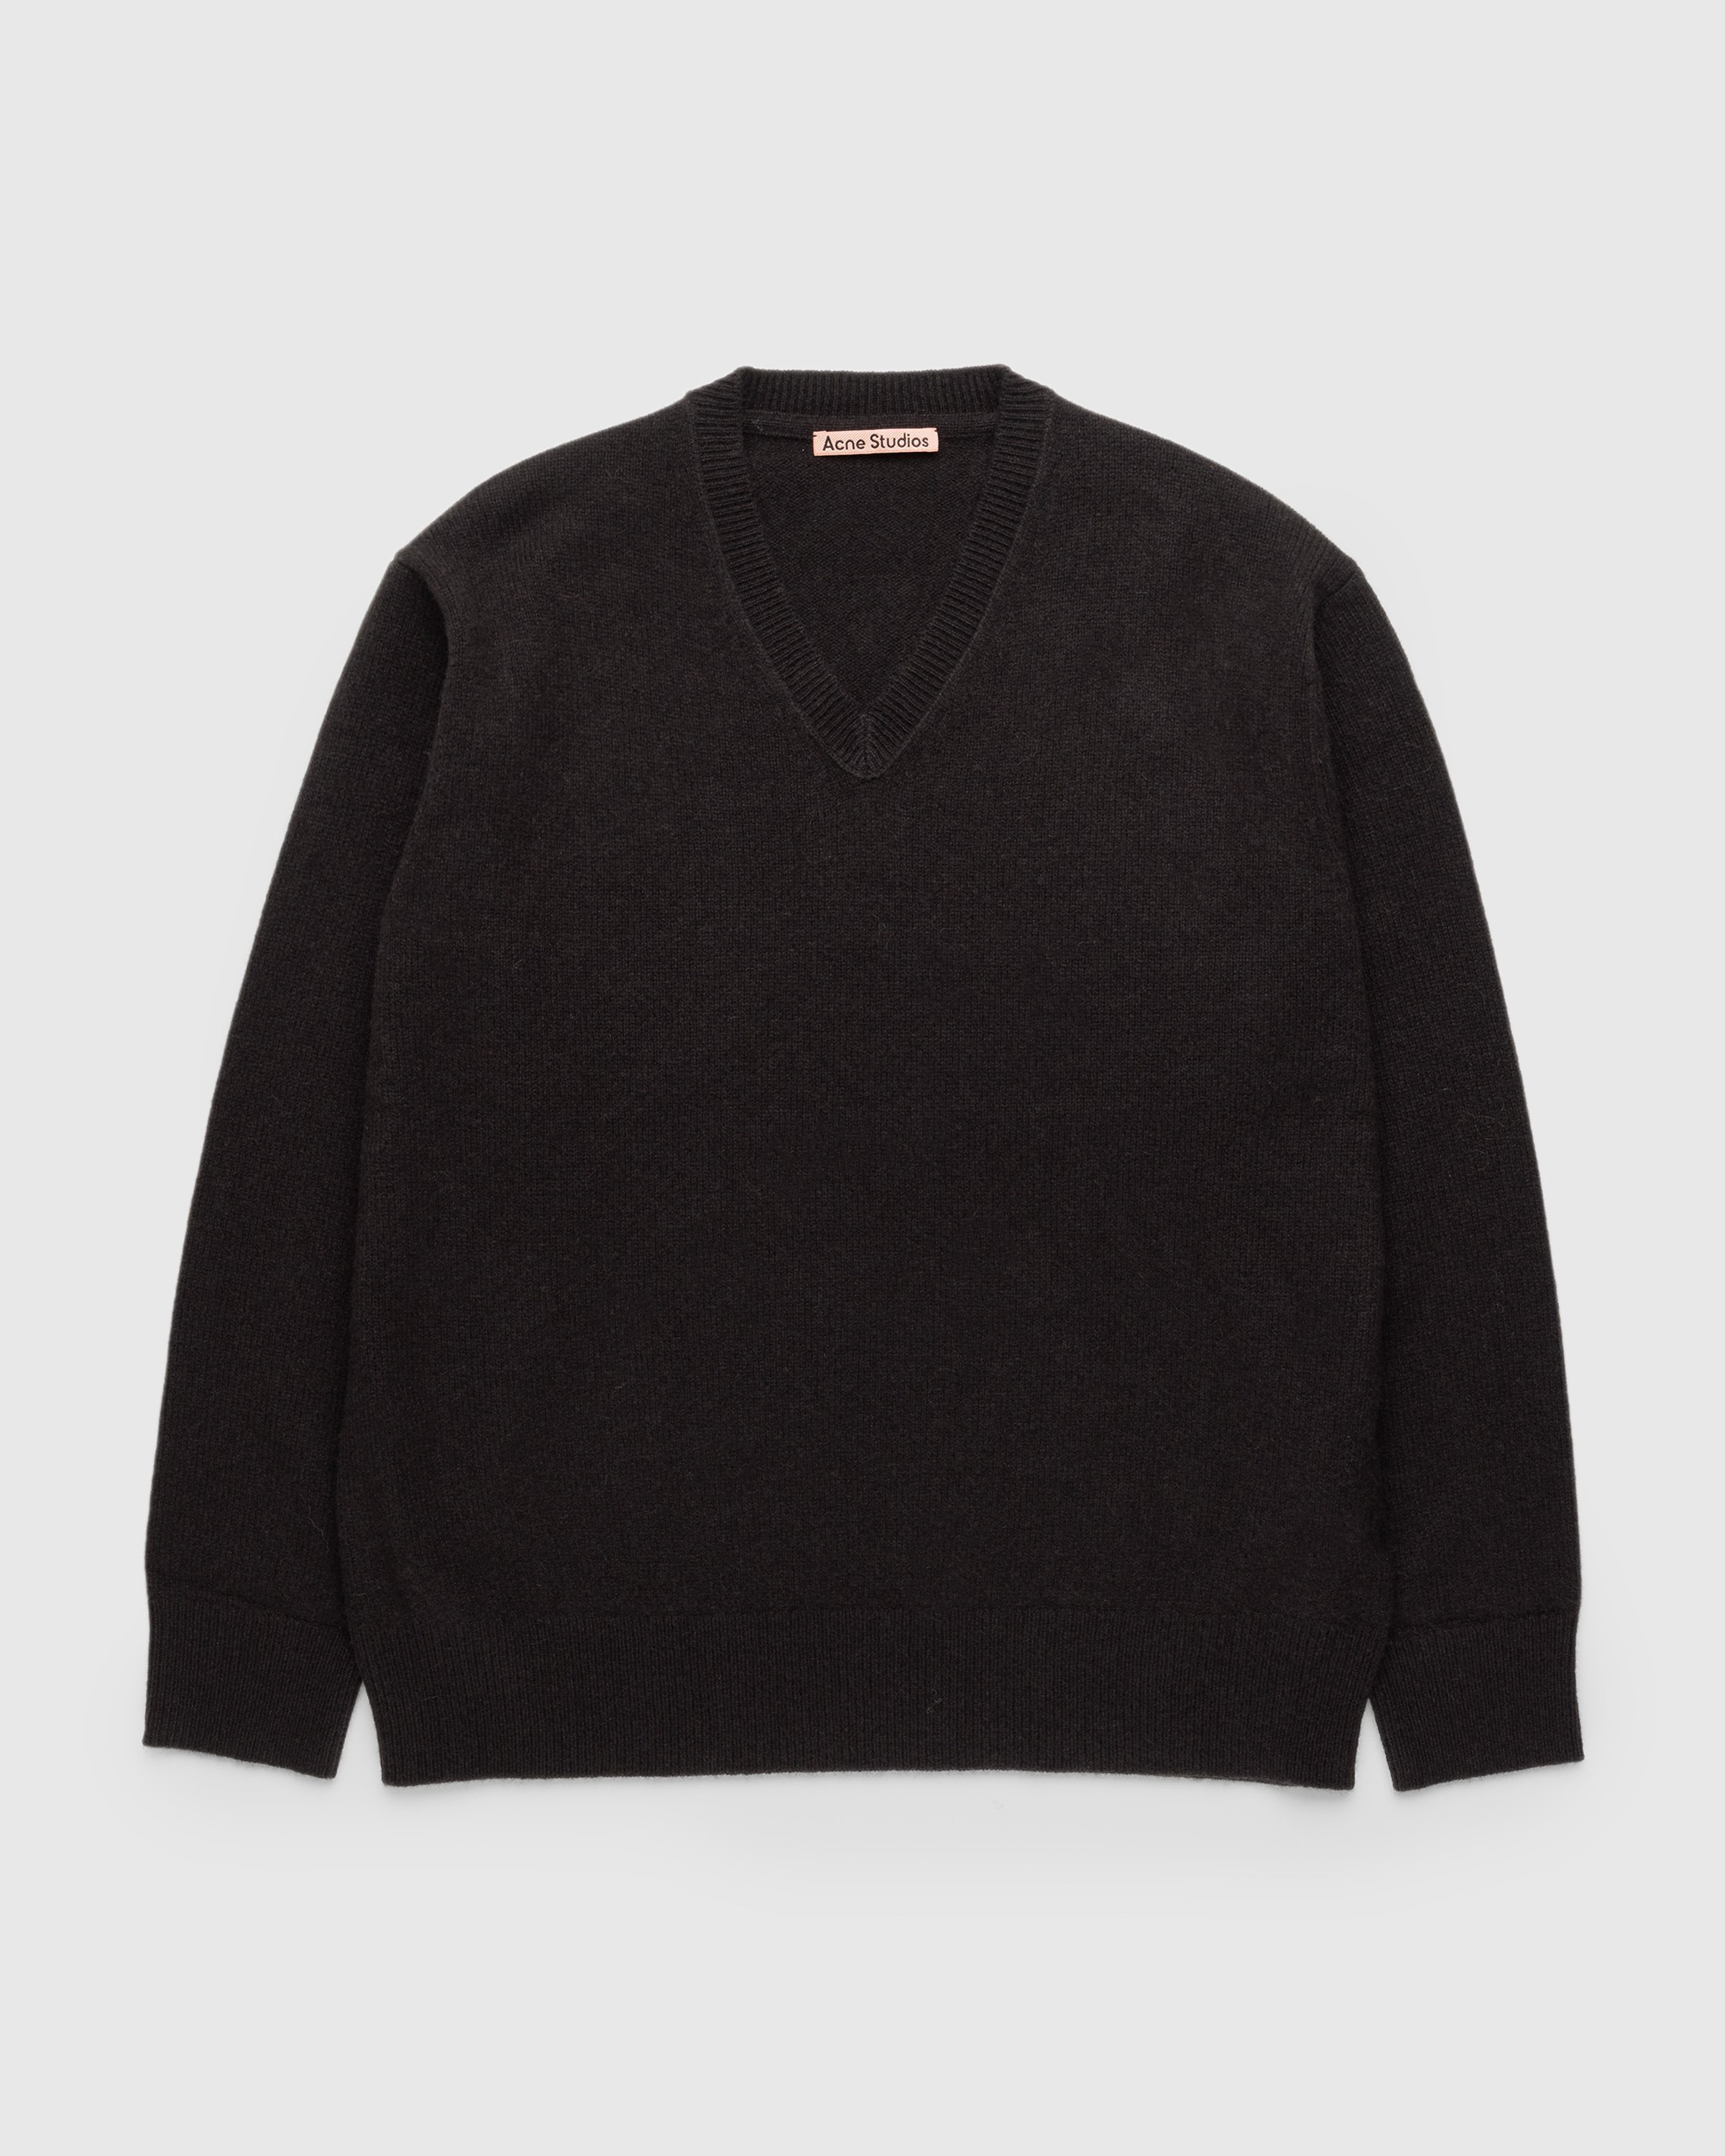 Acne Studios - Wool V-Neck Sweater Brown - Clothing - Brown - Image 1